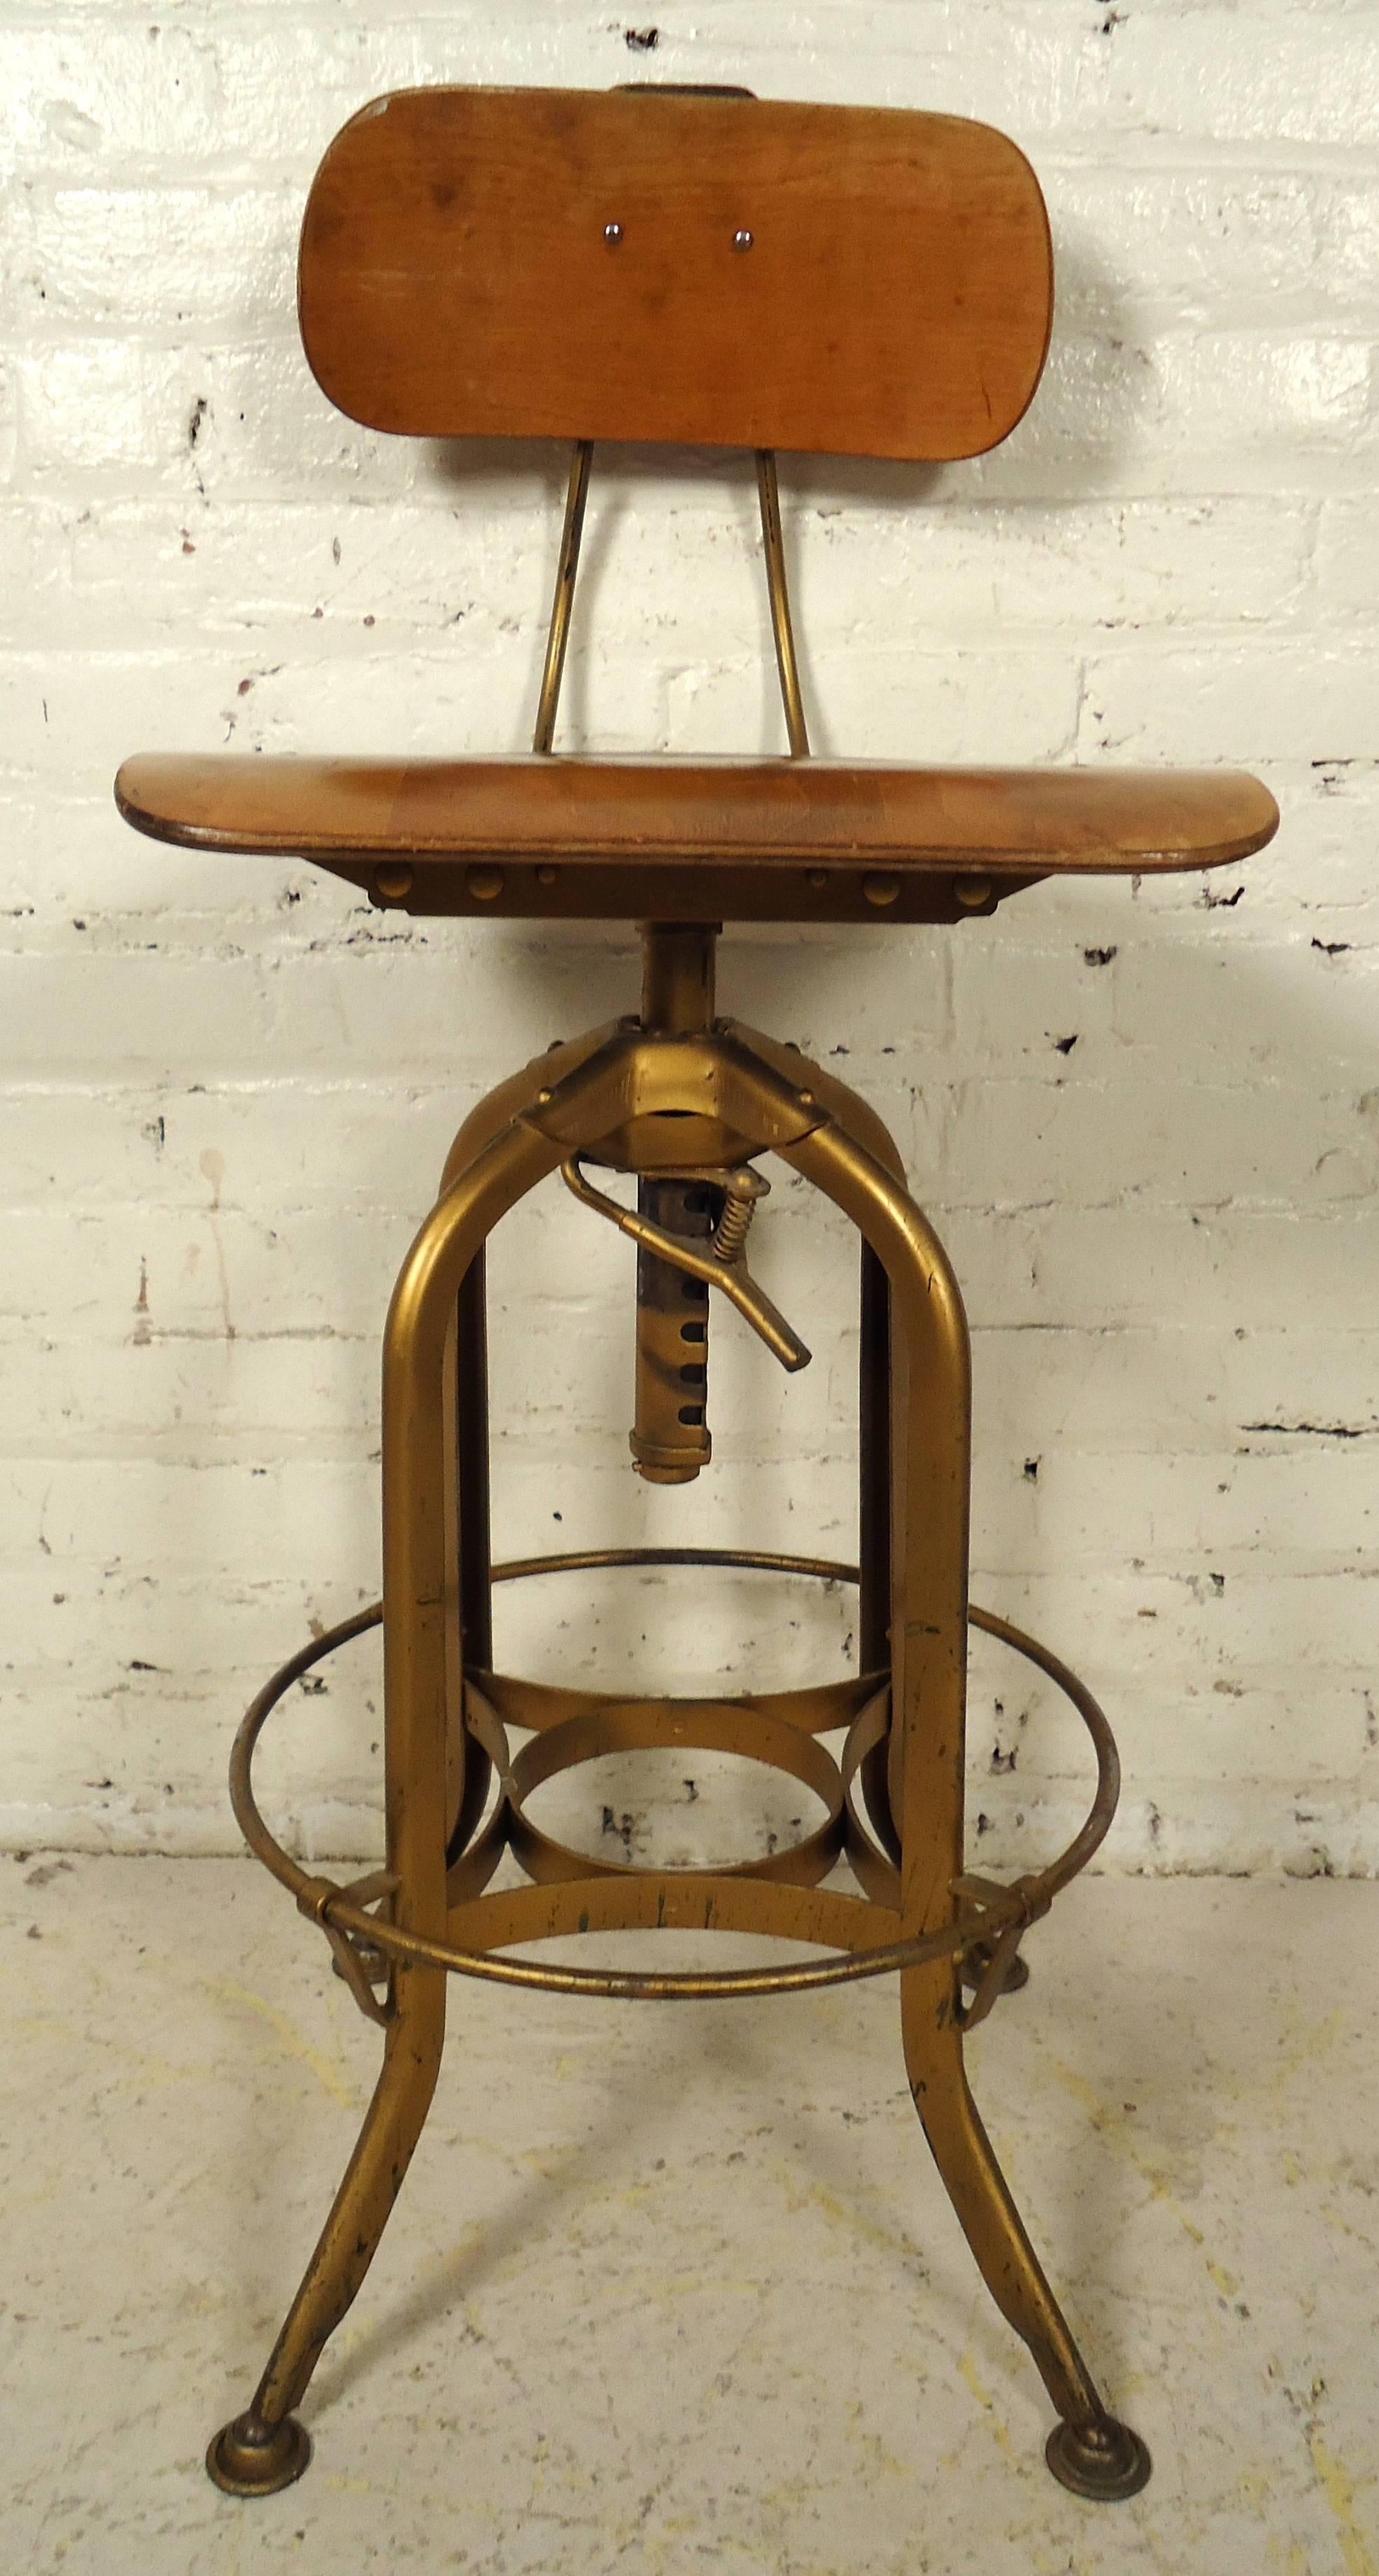 Vintage-modern Toledo stool featuring sturdy and adjustable metal base with bentwood seat and back.

Adjusted height 25 - 37.

Please confirm item location NY or NJ with dealer.